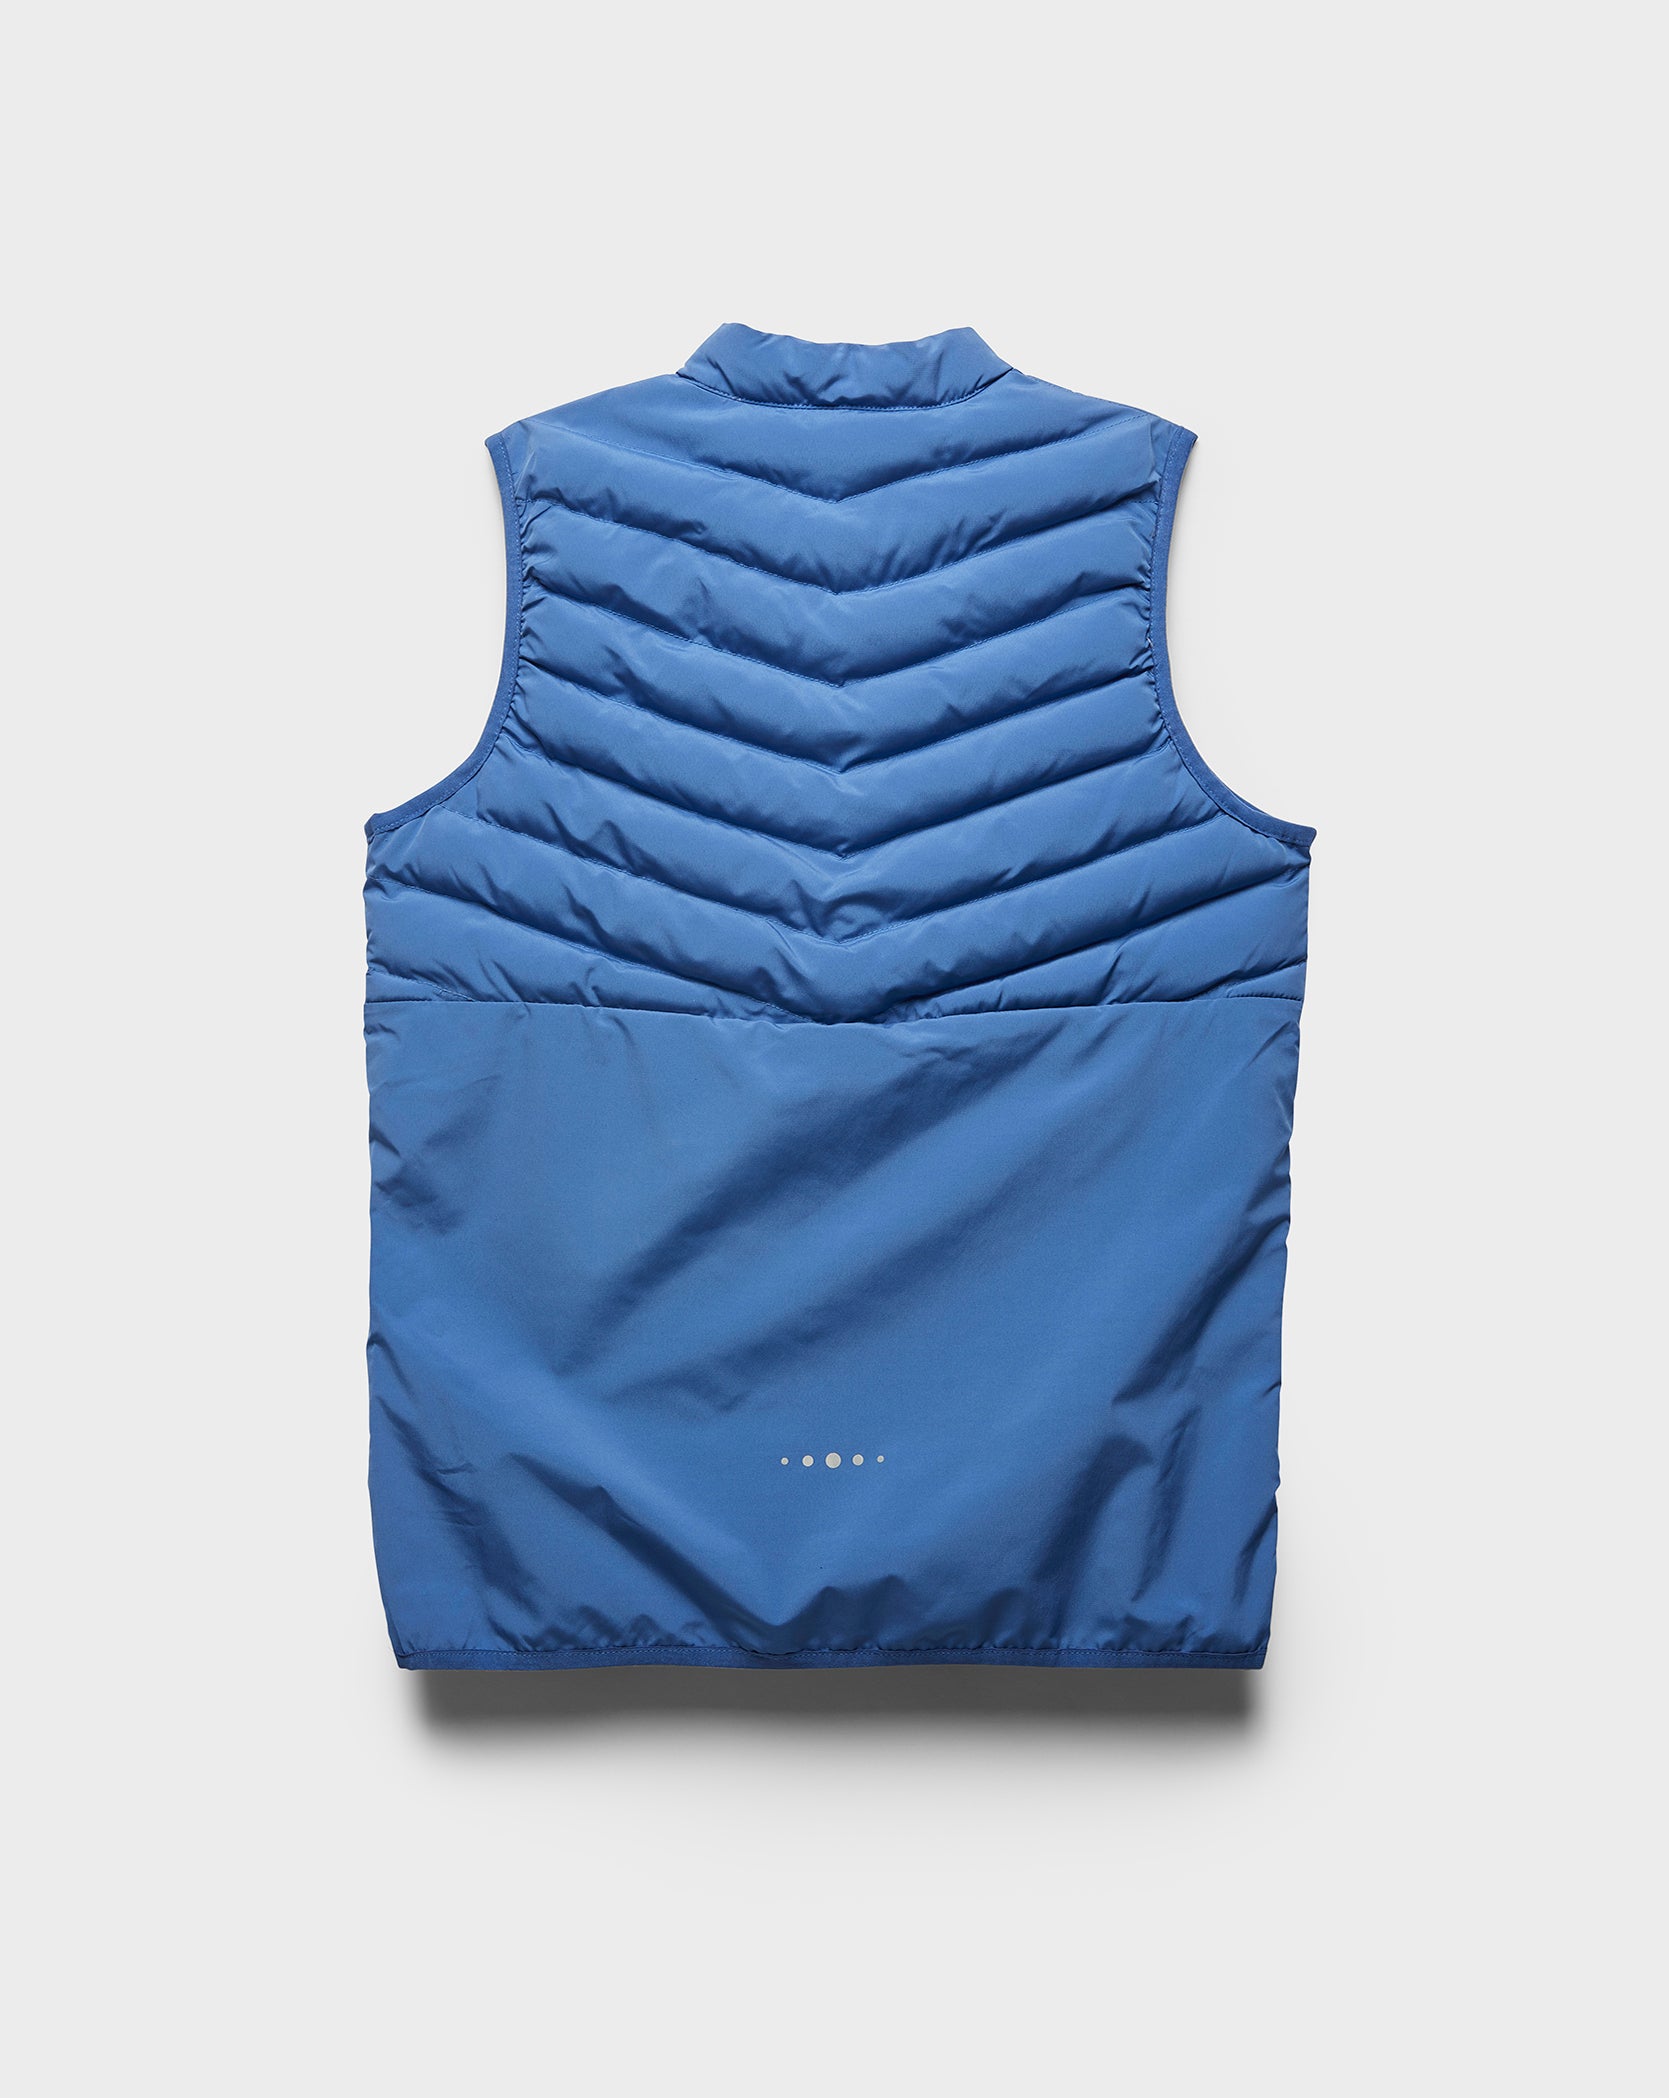 Twinzz active blue gilet back